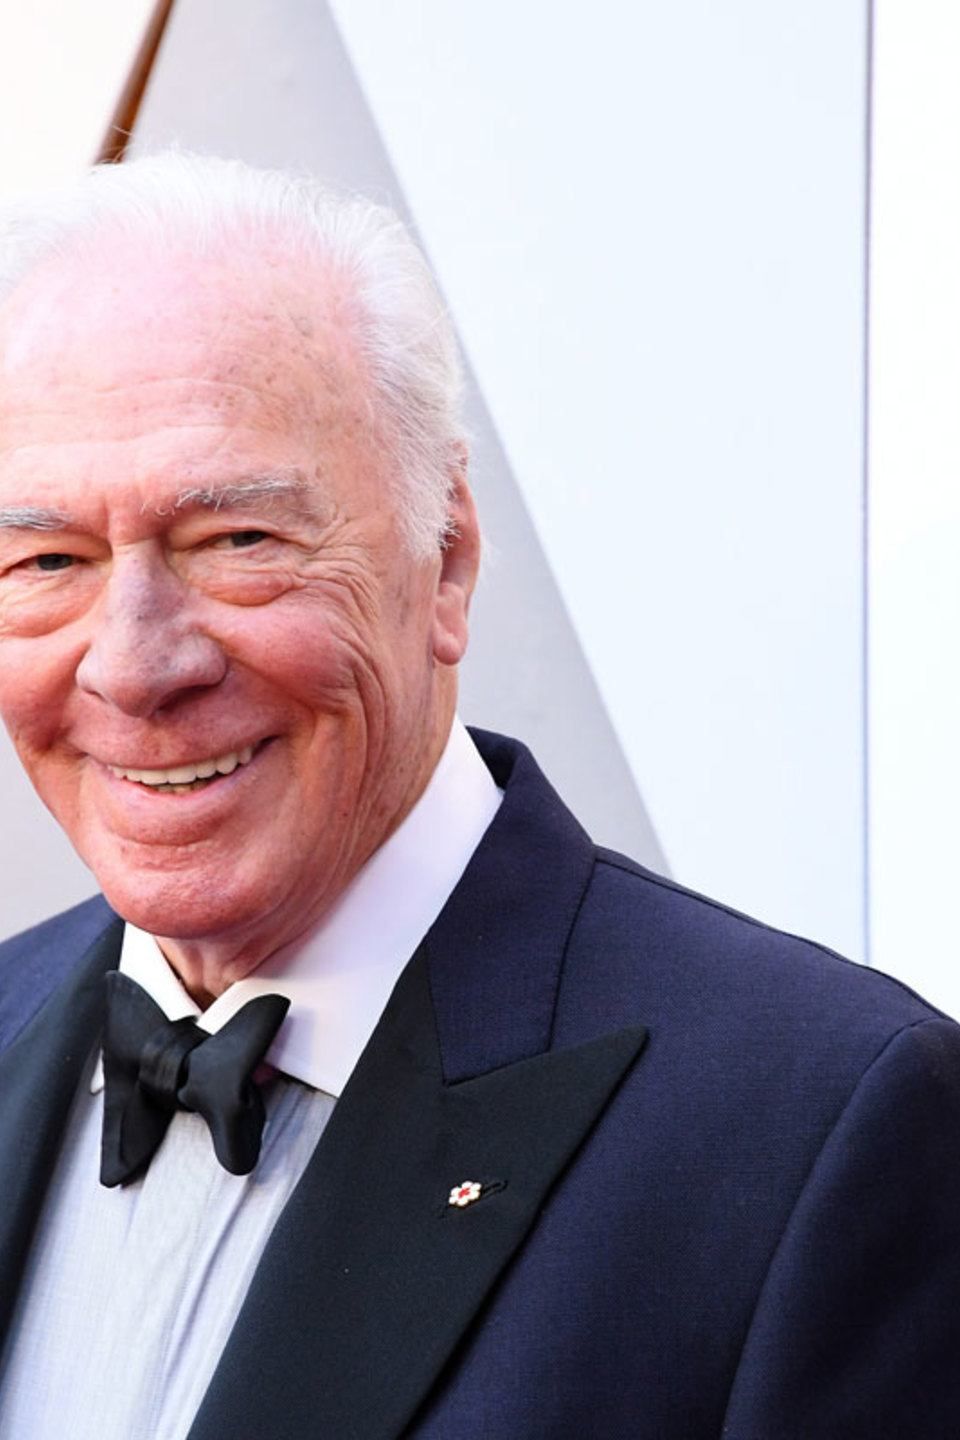 Christopher Plummer attends the 90th Annual Academy Awards at Hollywood & Highland Center on March 4, 2018 in Hollywood, California. (Photo by Steve Granitz/WireImage)